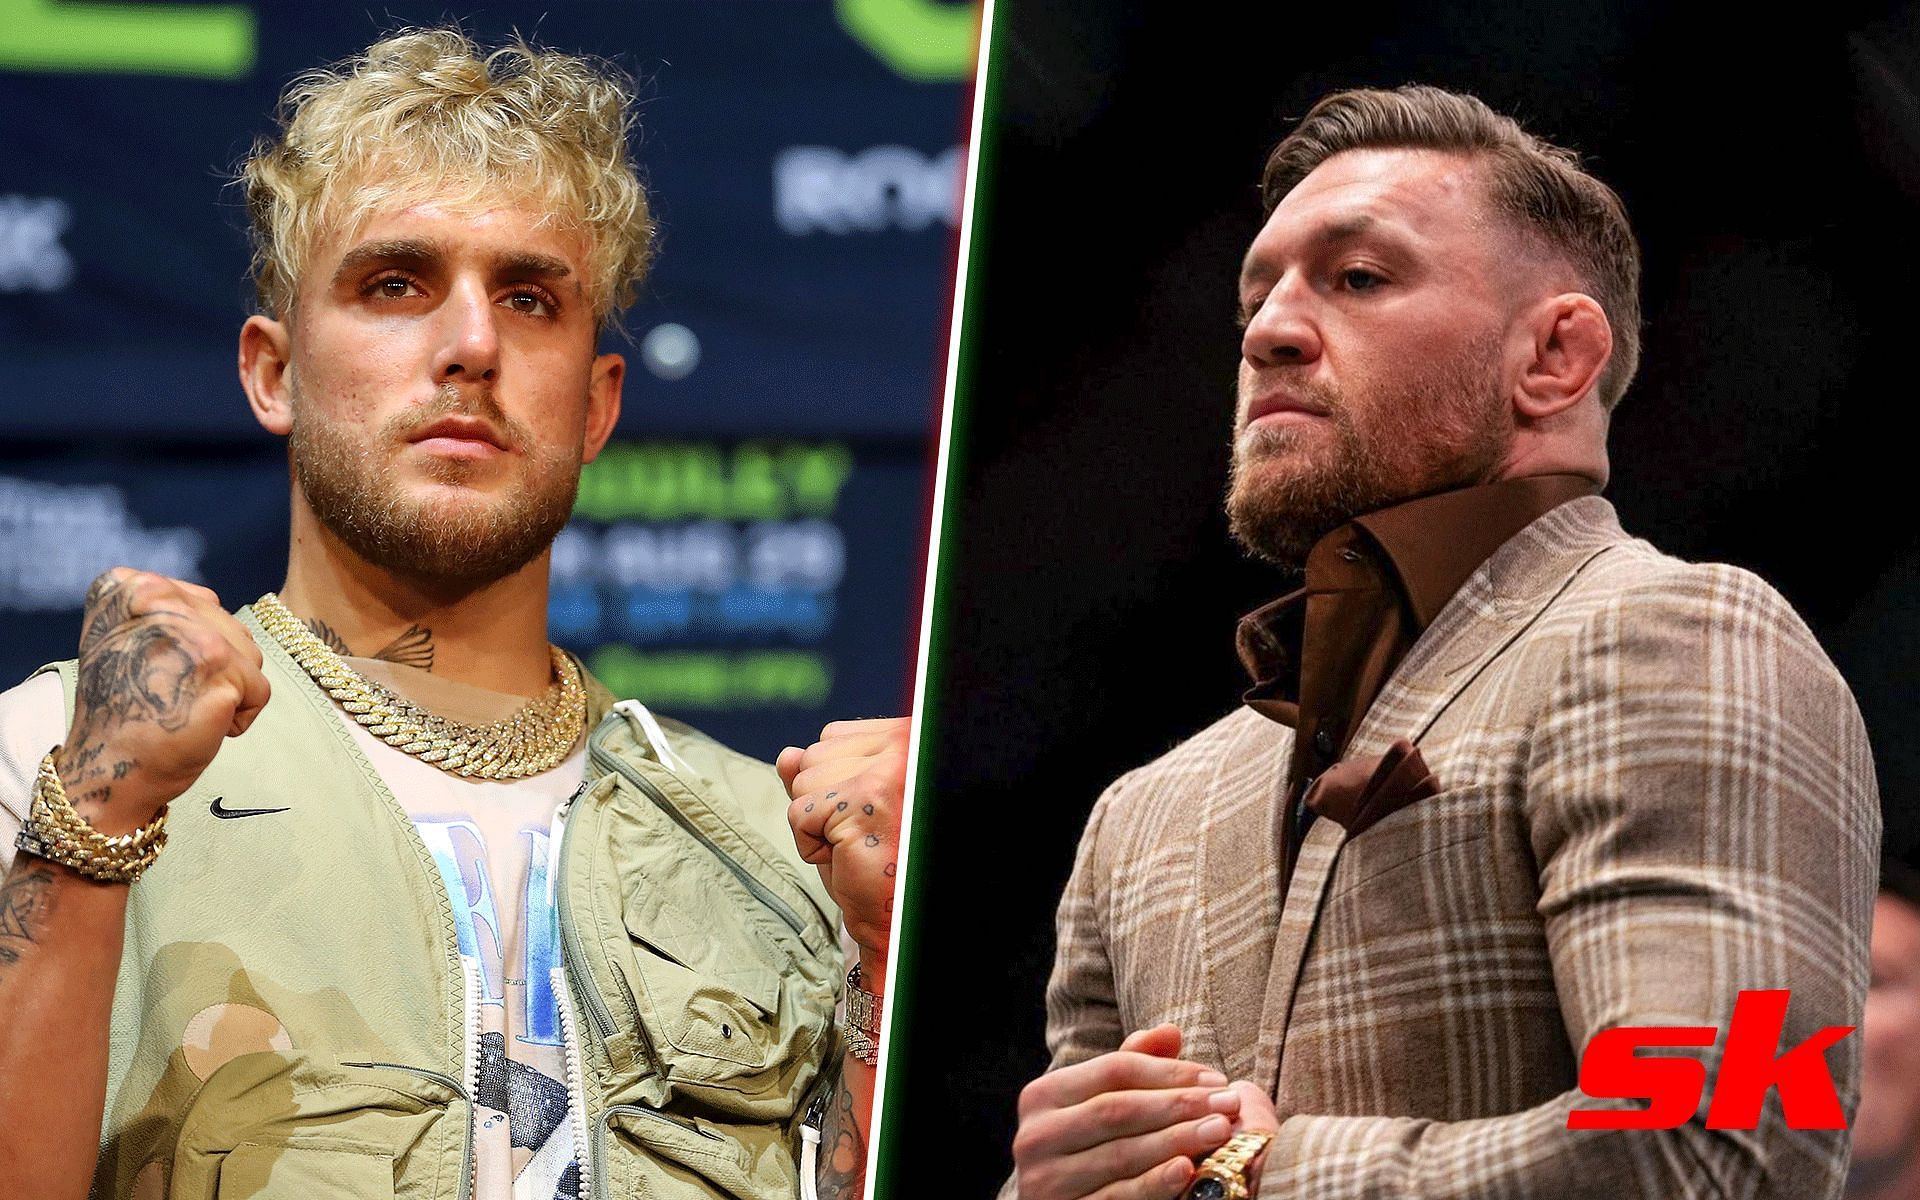 Jake Paul (left) and Conor McGregor (right). [Images courtesy: left image from Getty and right image from Instagram @thenotoriousmma]